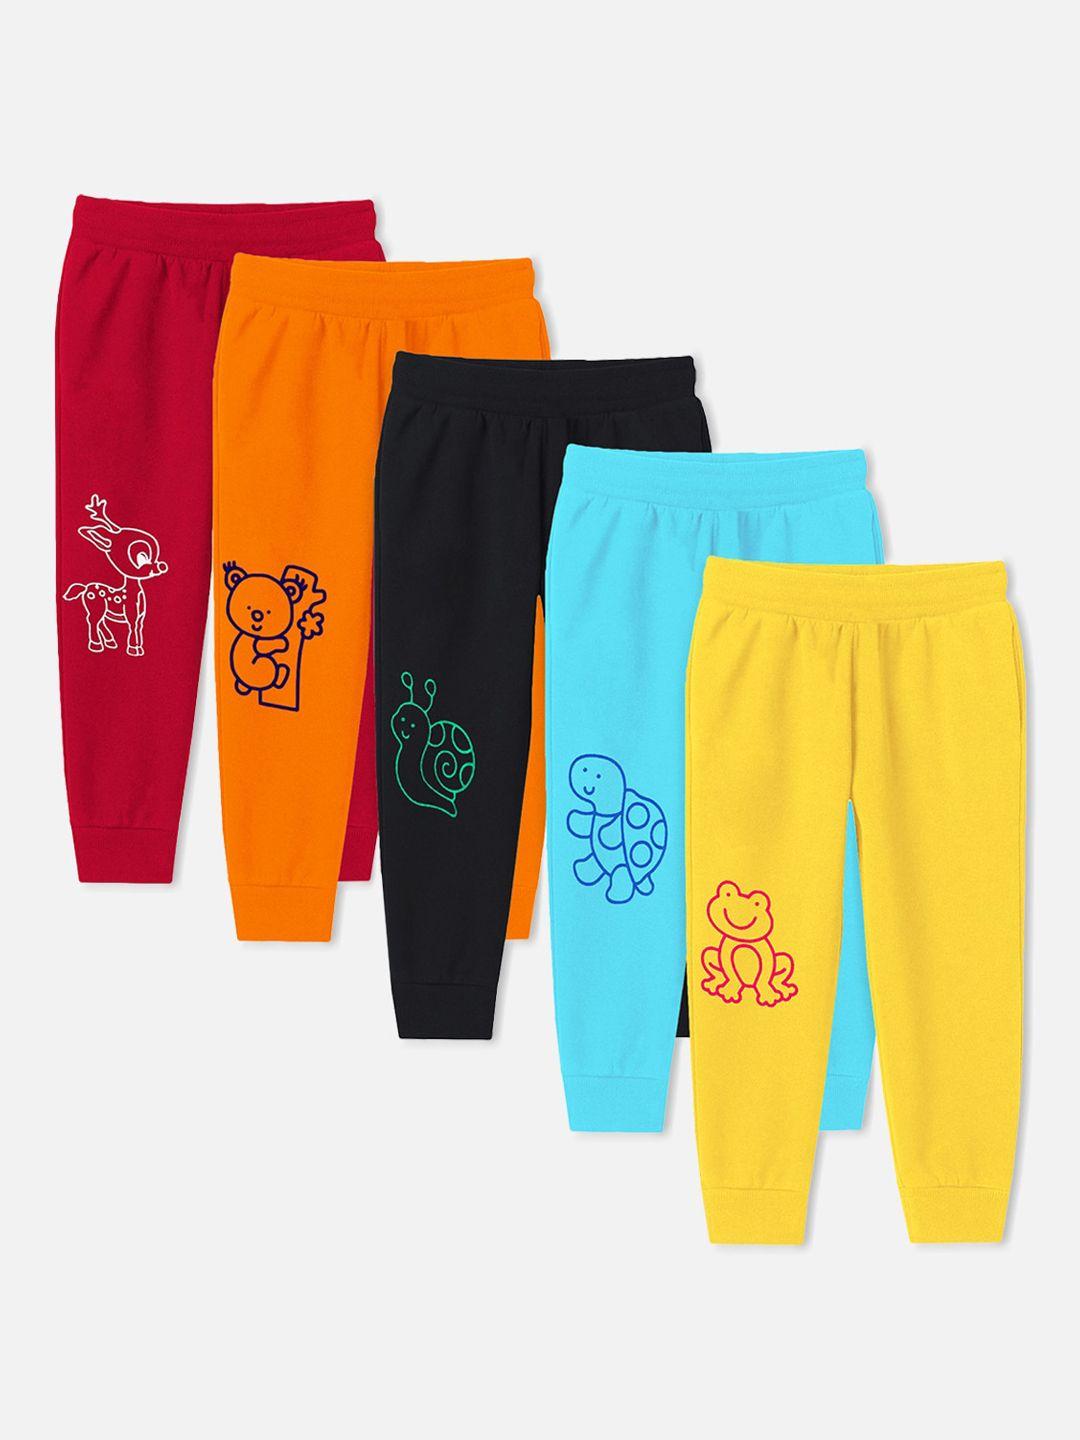 trampoline kids pack of 5 printed cotton lounge pants